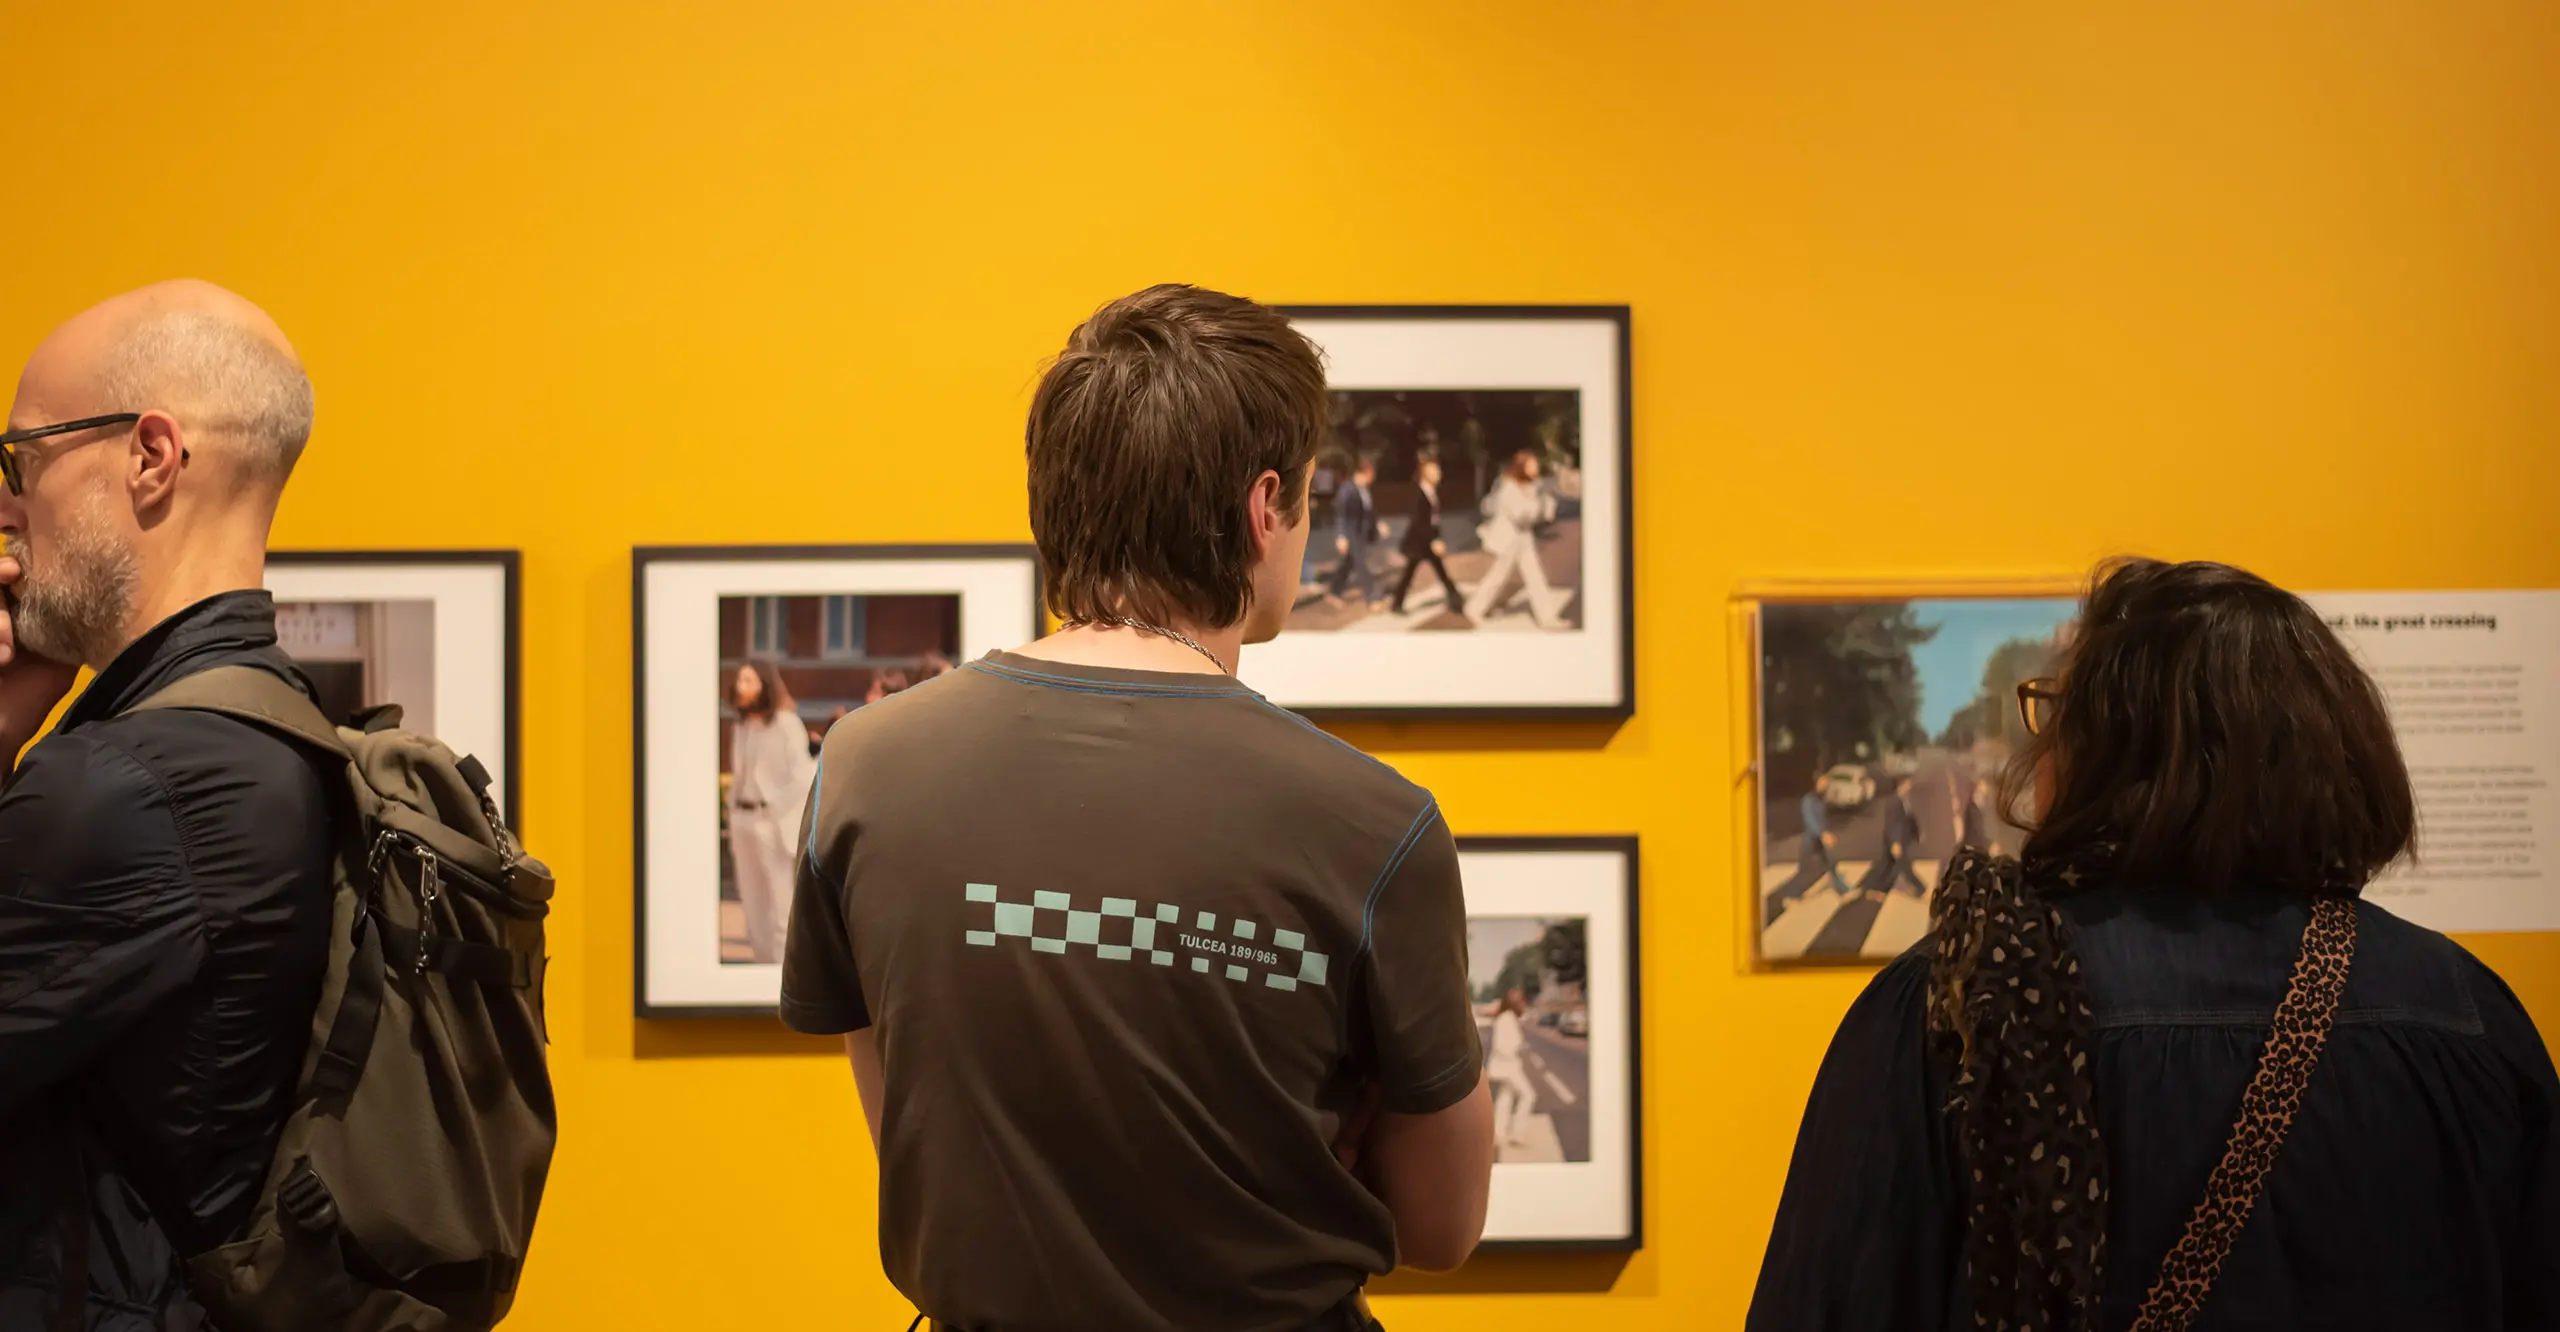 Three people in a Gallery looking at framed images in an exhibition